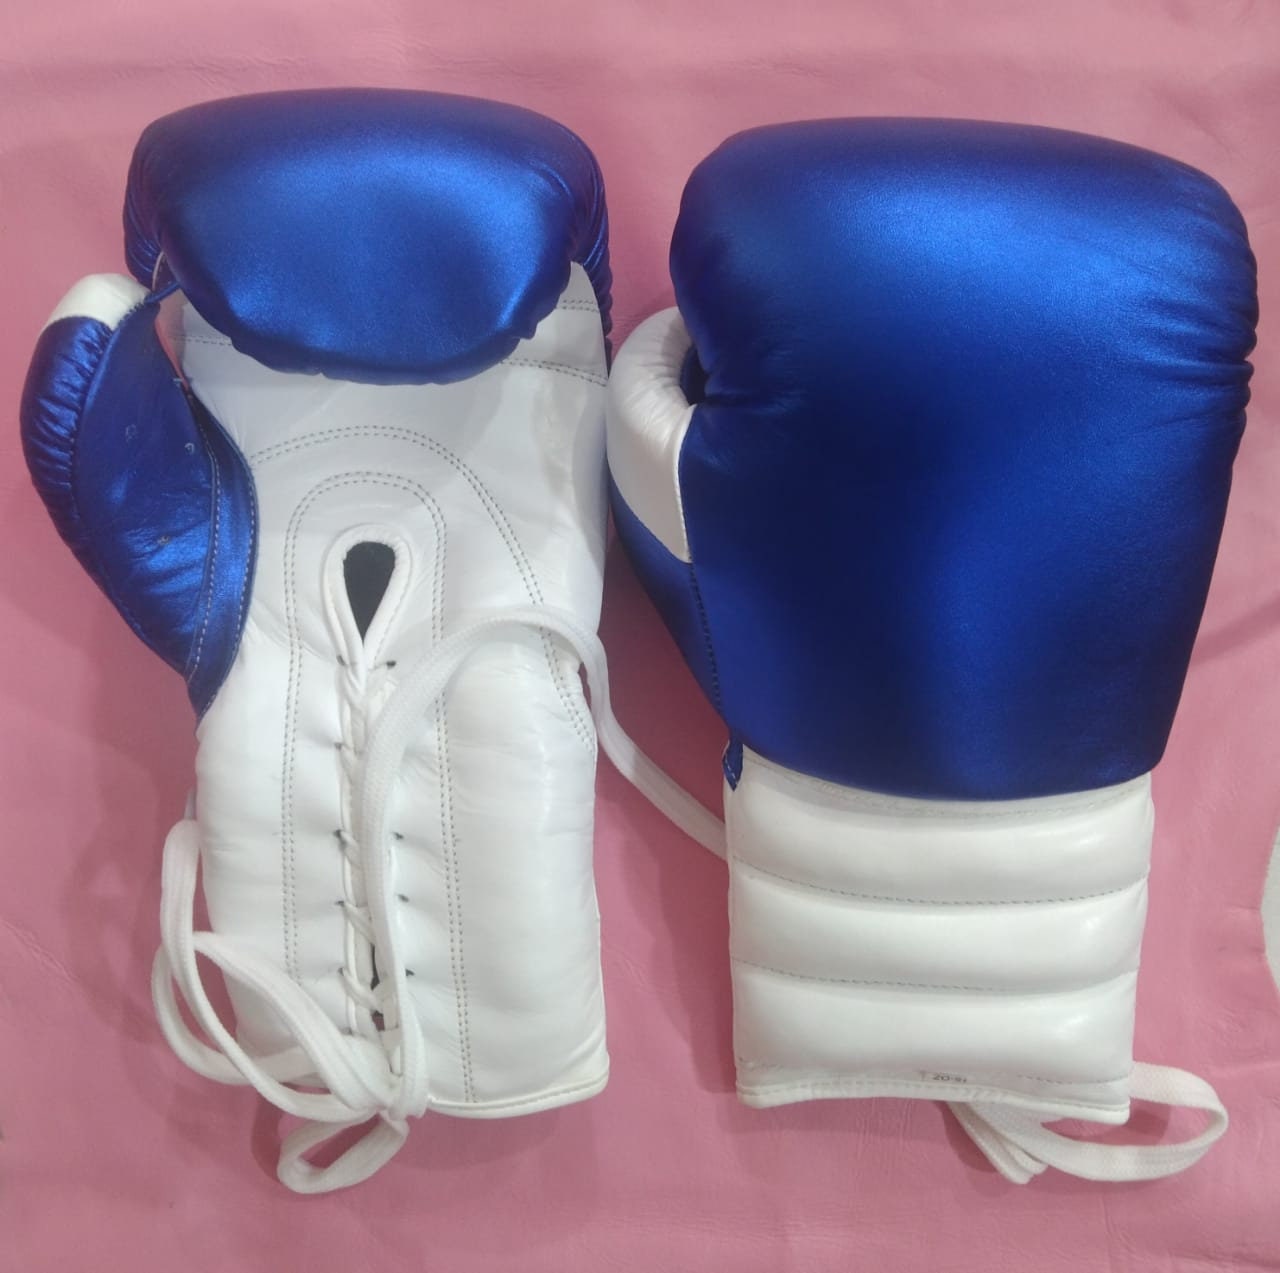 New Custom Made Boxing Gloves Made With Cowhide Skin. FREE - Etsy UK